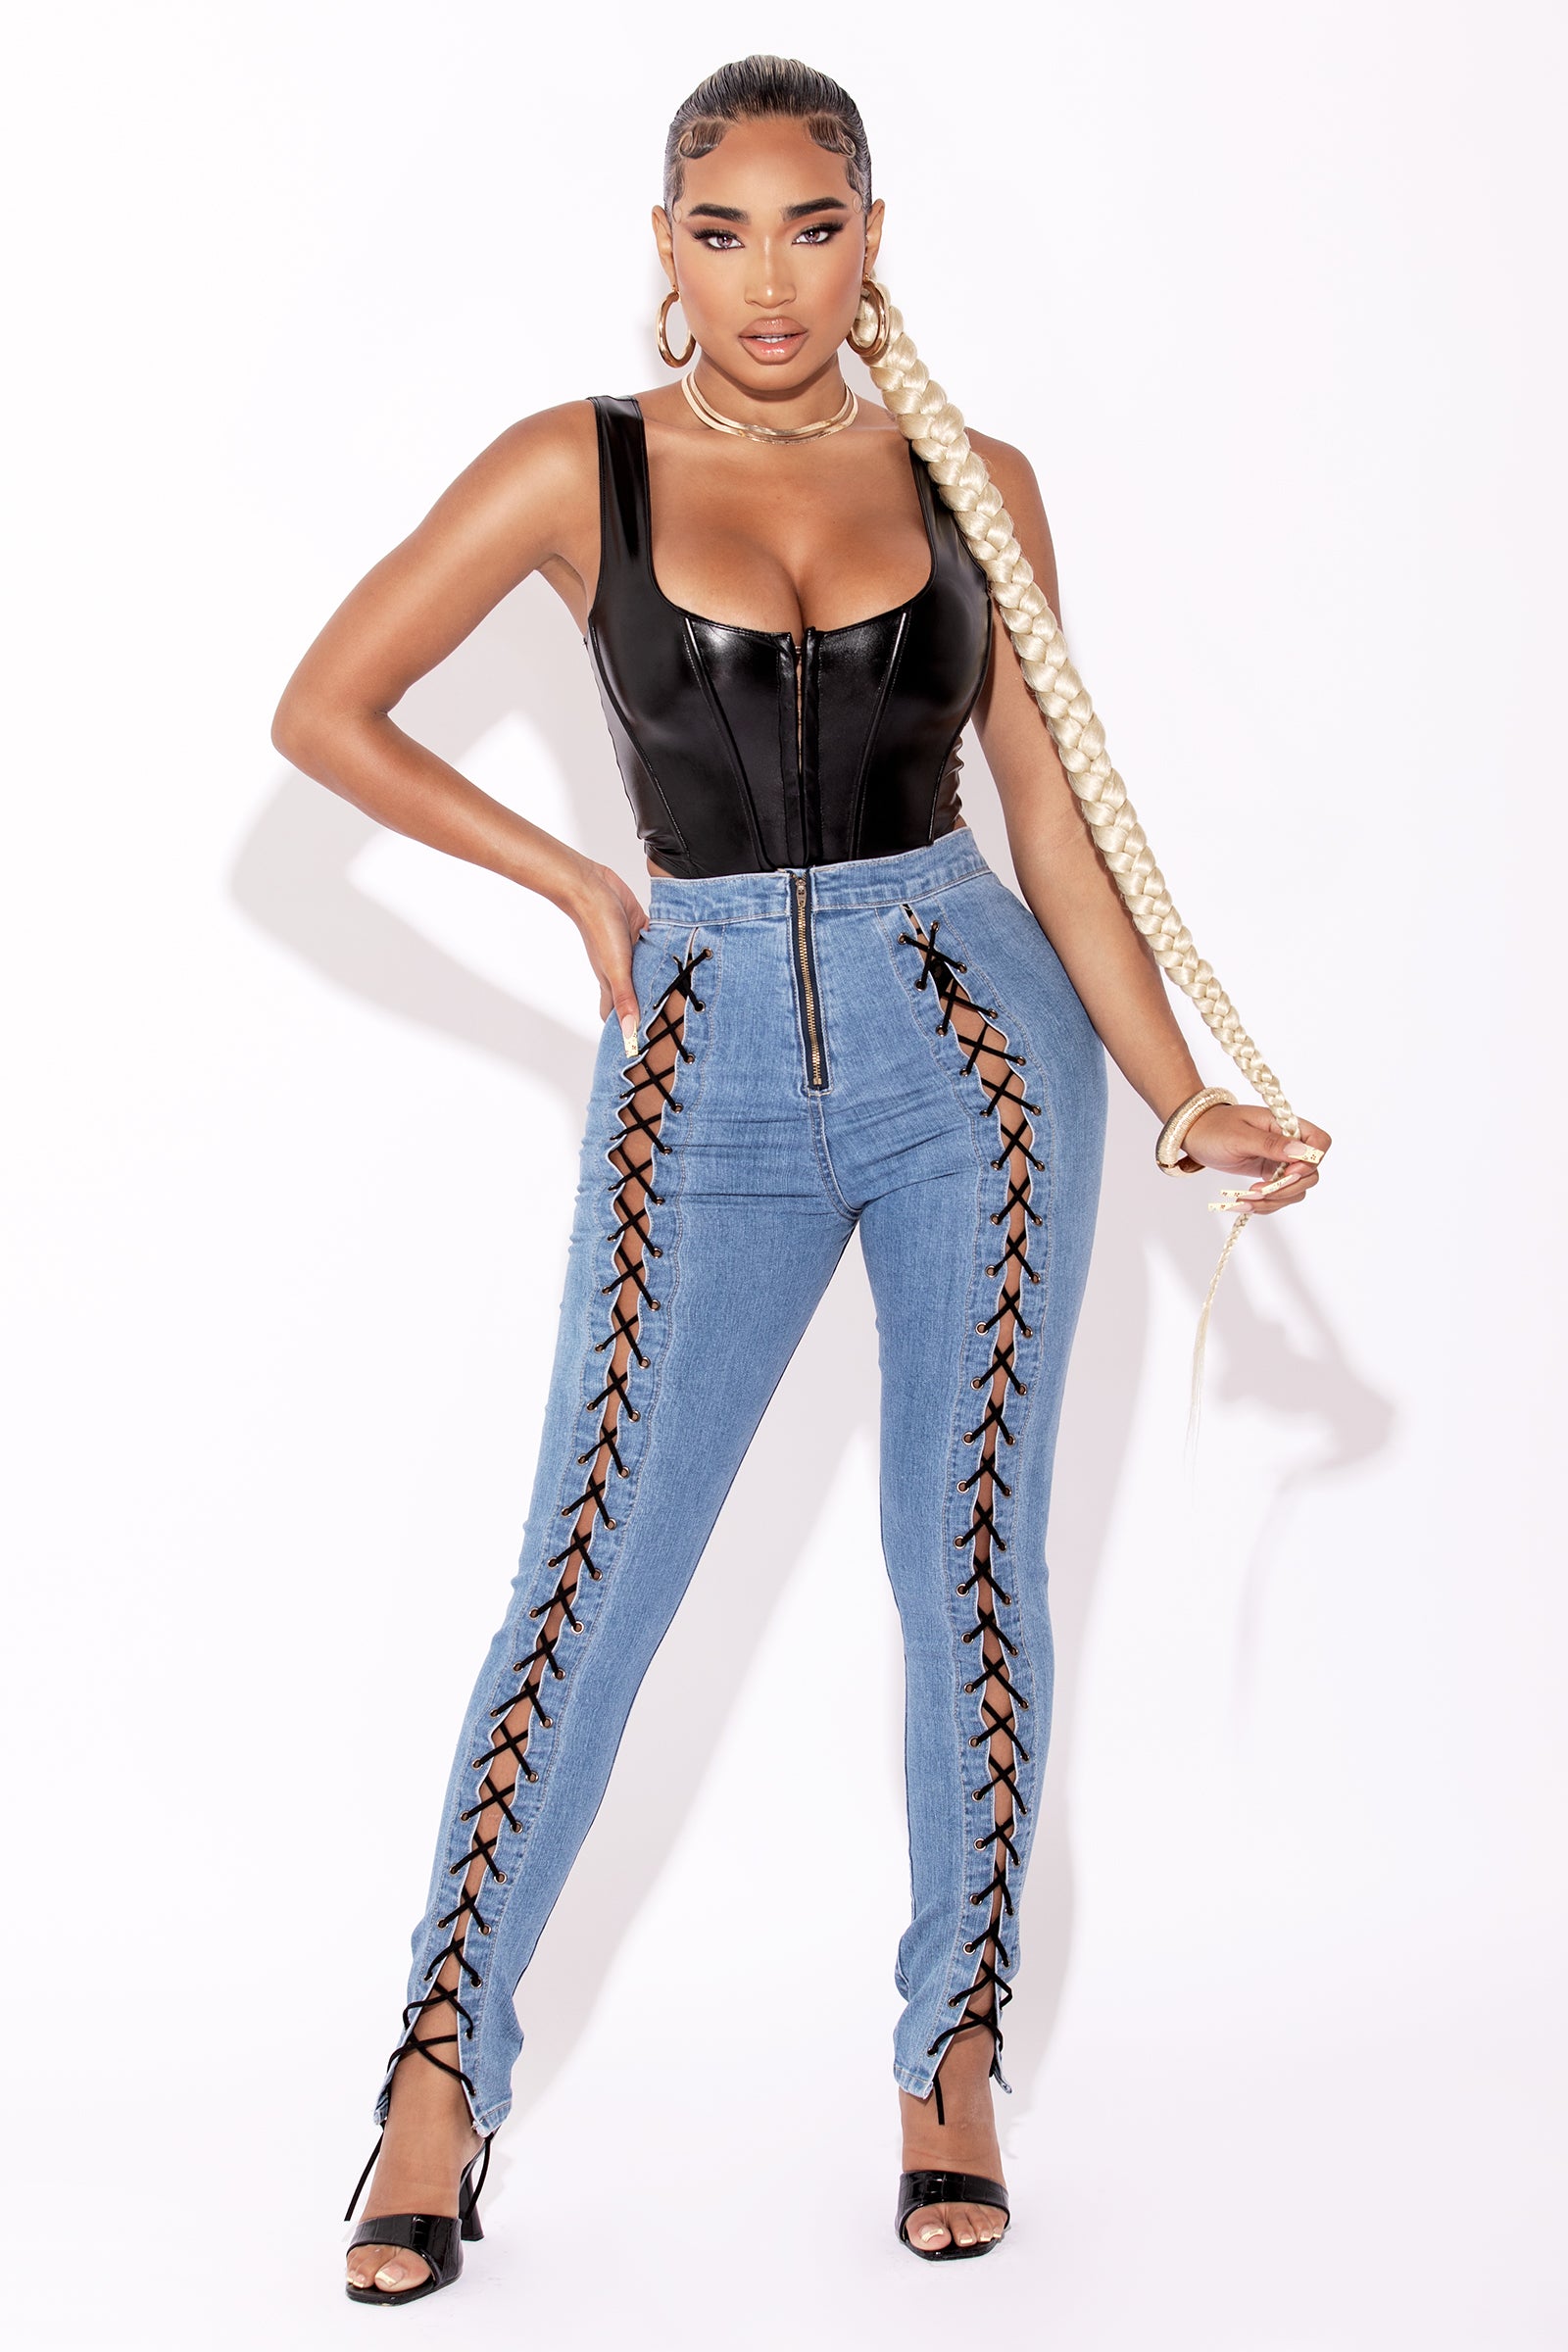 & Other Stories lace-up cut-out jeans in blue | ASOS